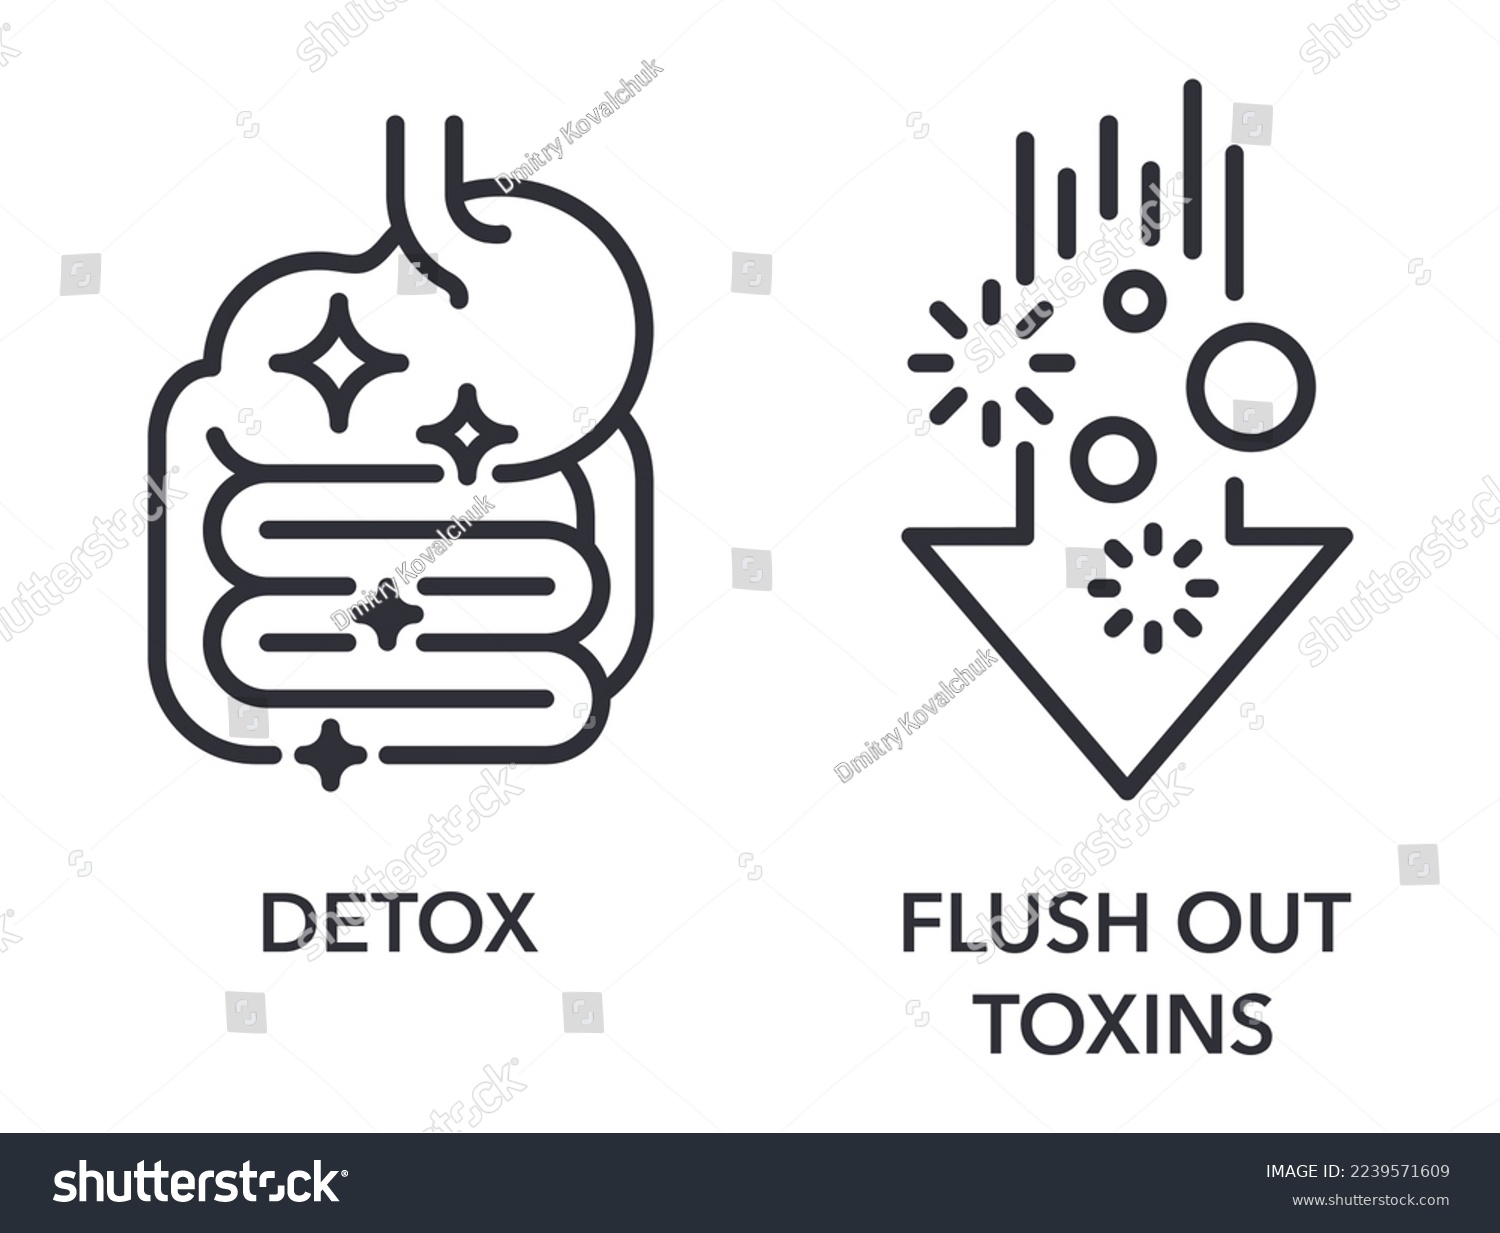 SVG of Detox and Flush Out Toxins icons set - labeling of food supplement. Pictograms set in thin line svg